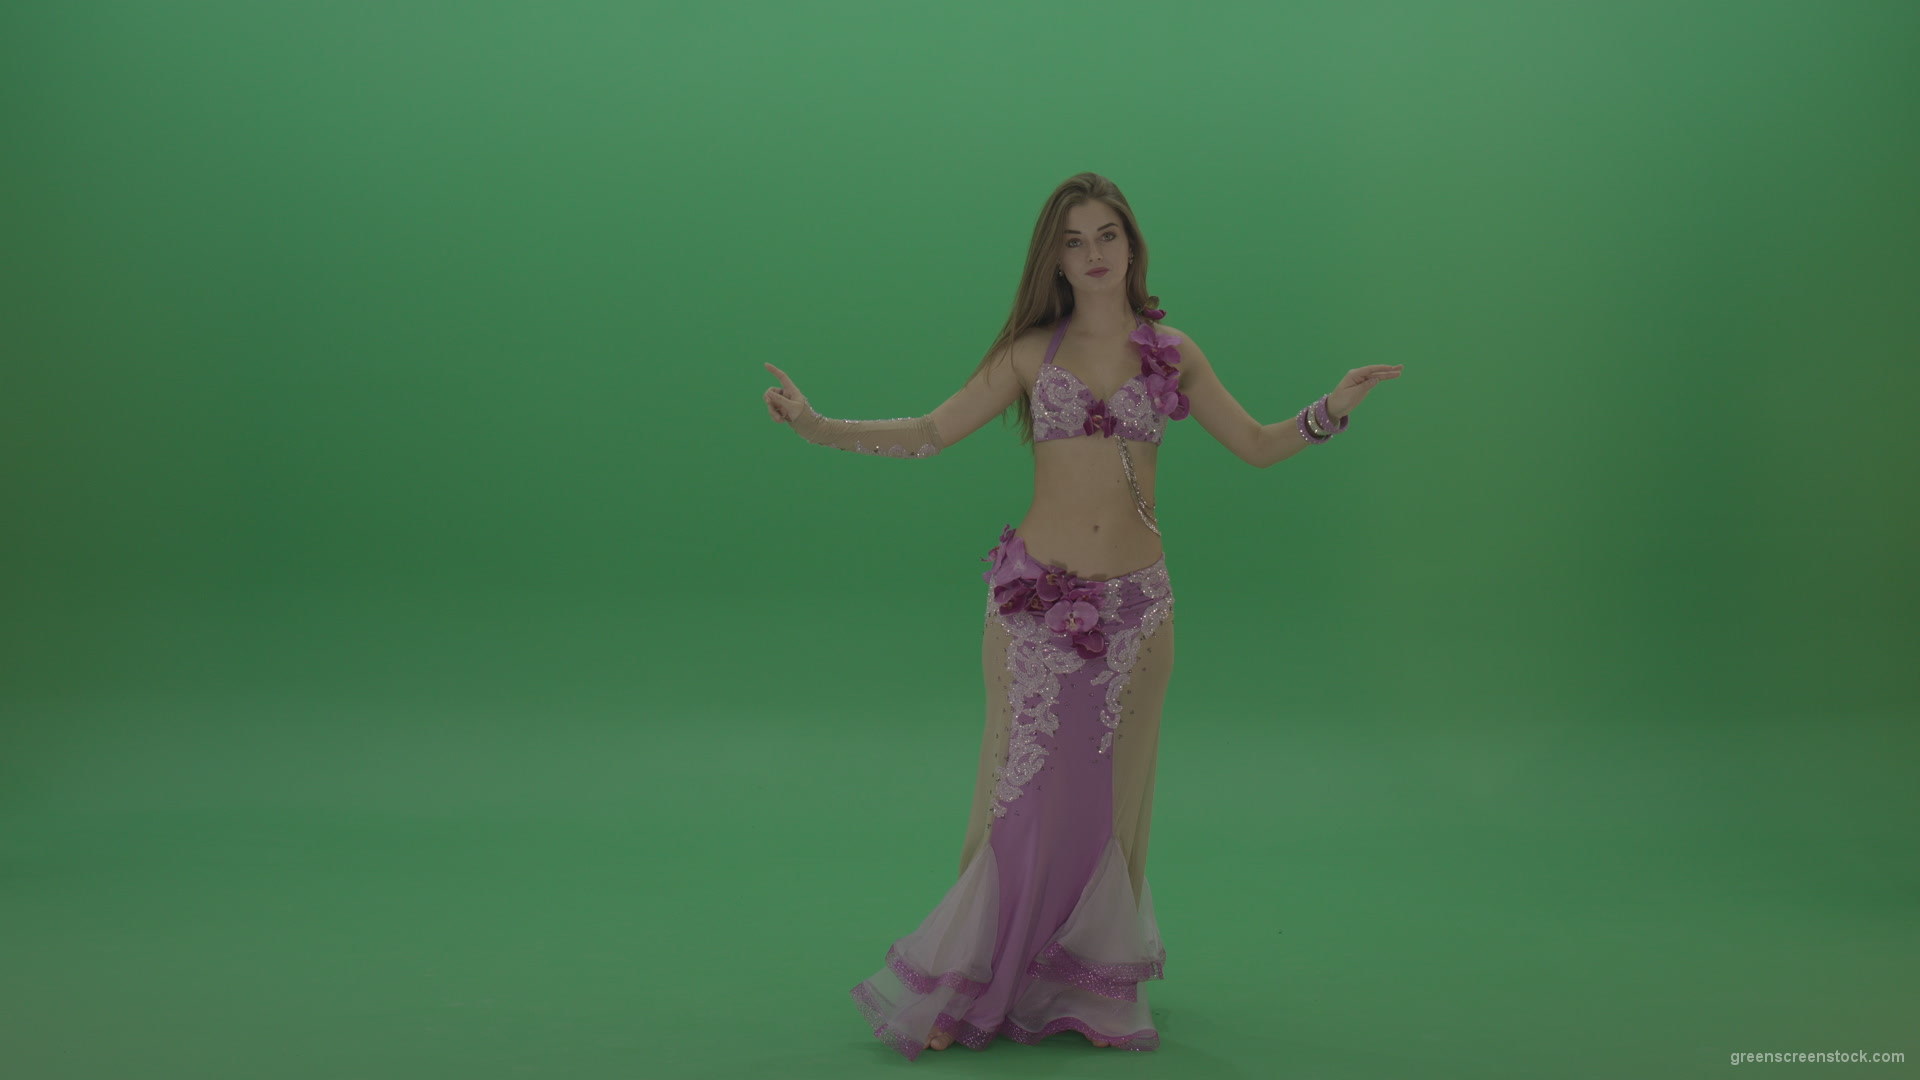 Delightful-belly-dancer-in-pink-wear-display-amazing-dance-moves-over-chromakey-background_001 Green Screen Stock